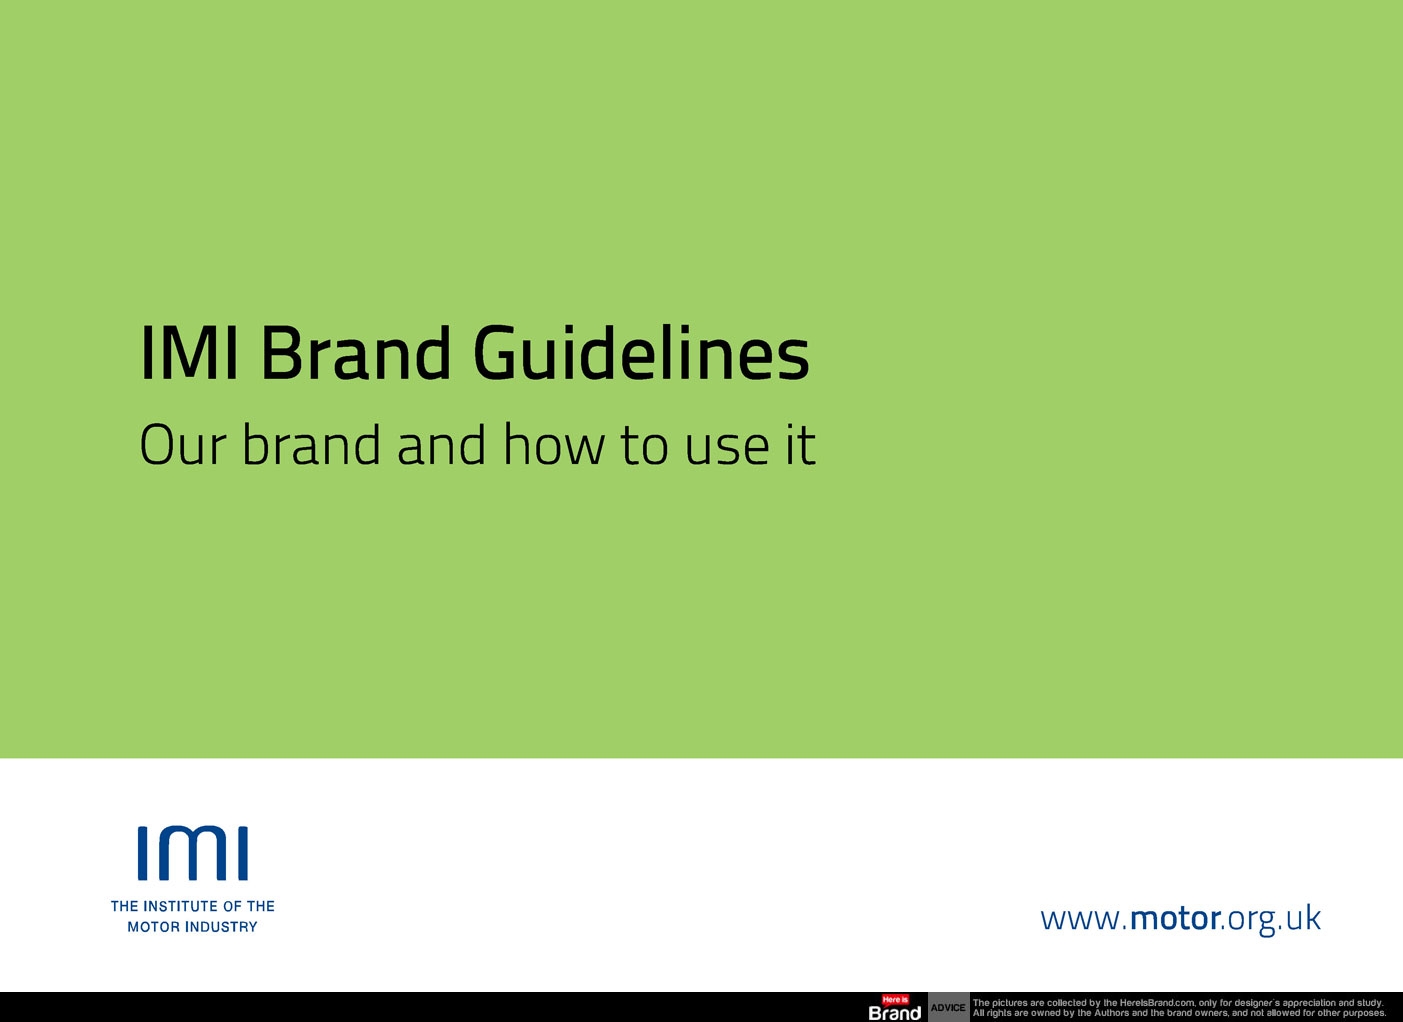 IMI The Institute of The Motor Industry corporate brand guidelines